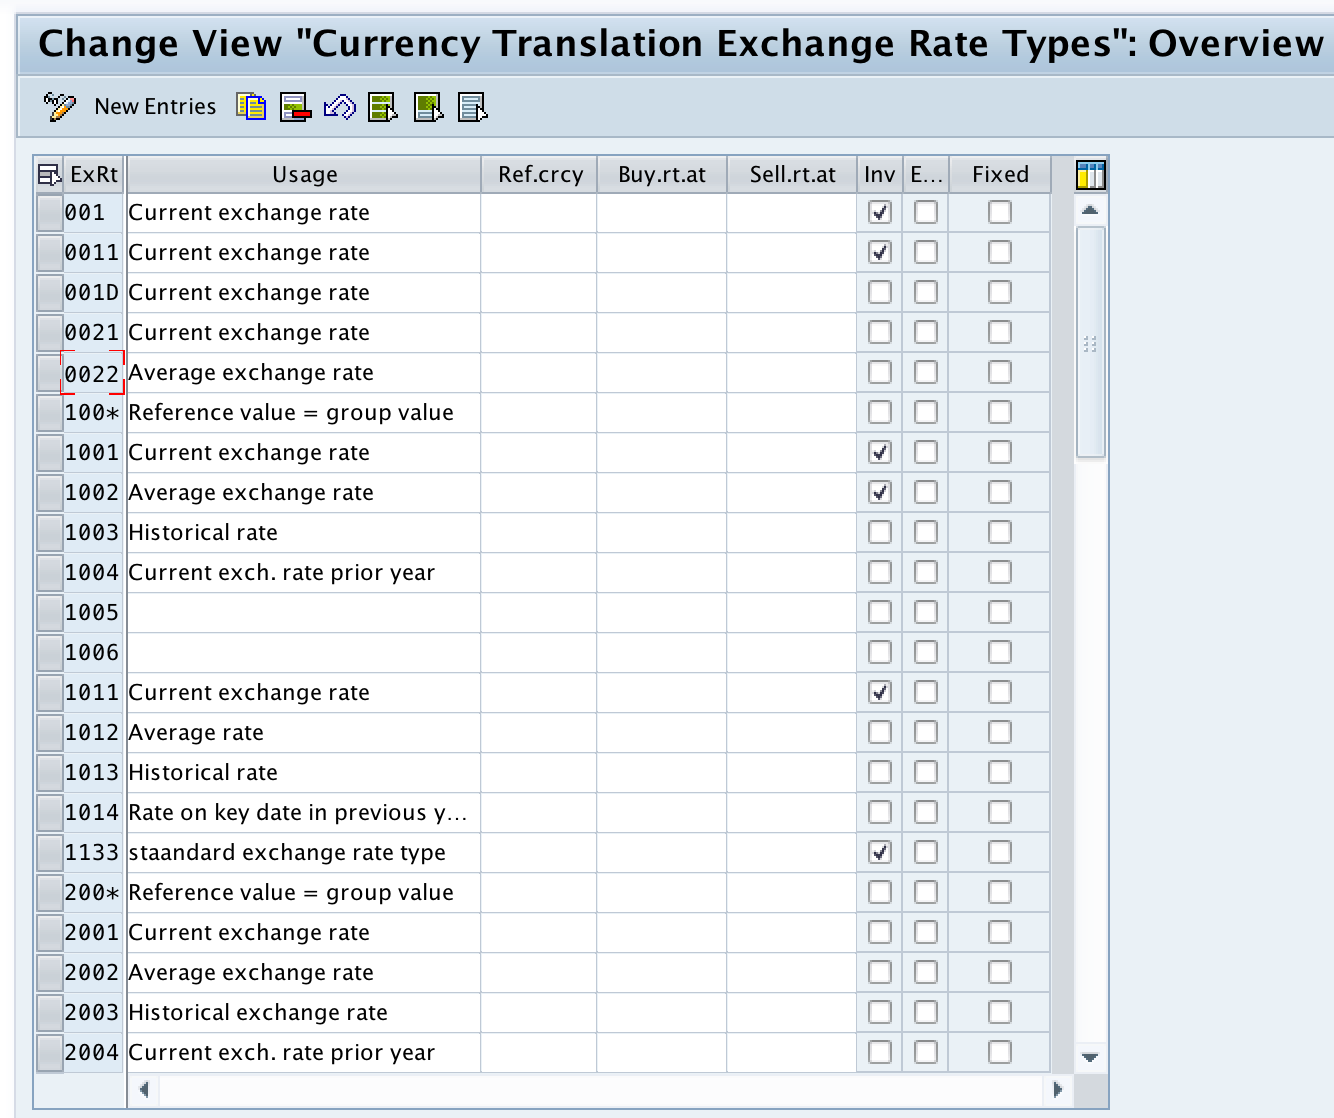 How to Check Exchange Rate Types in SAP